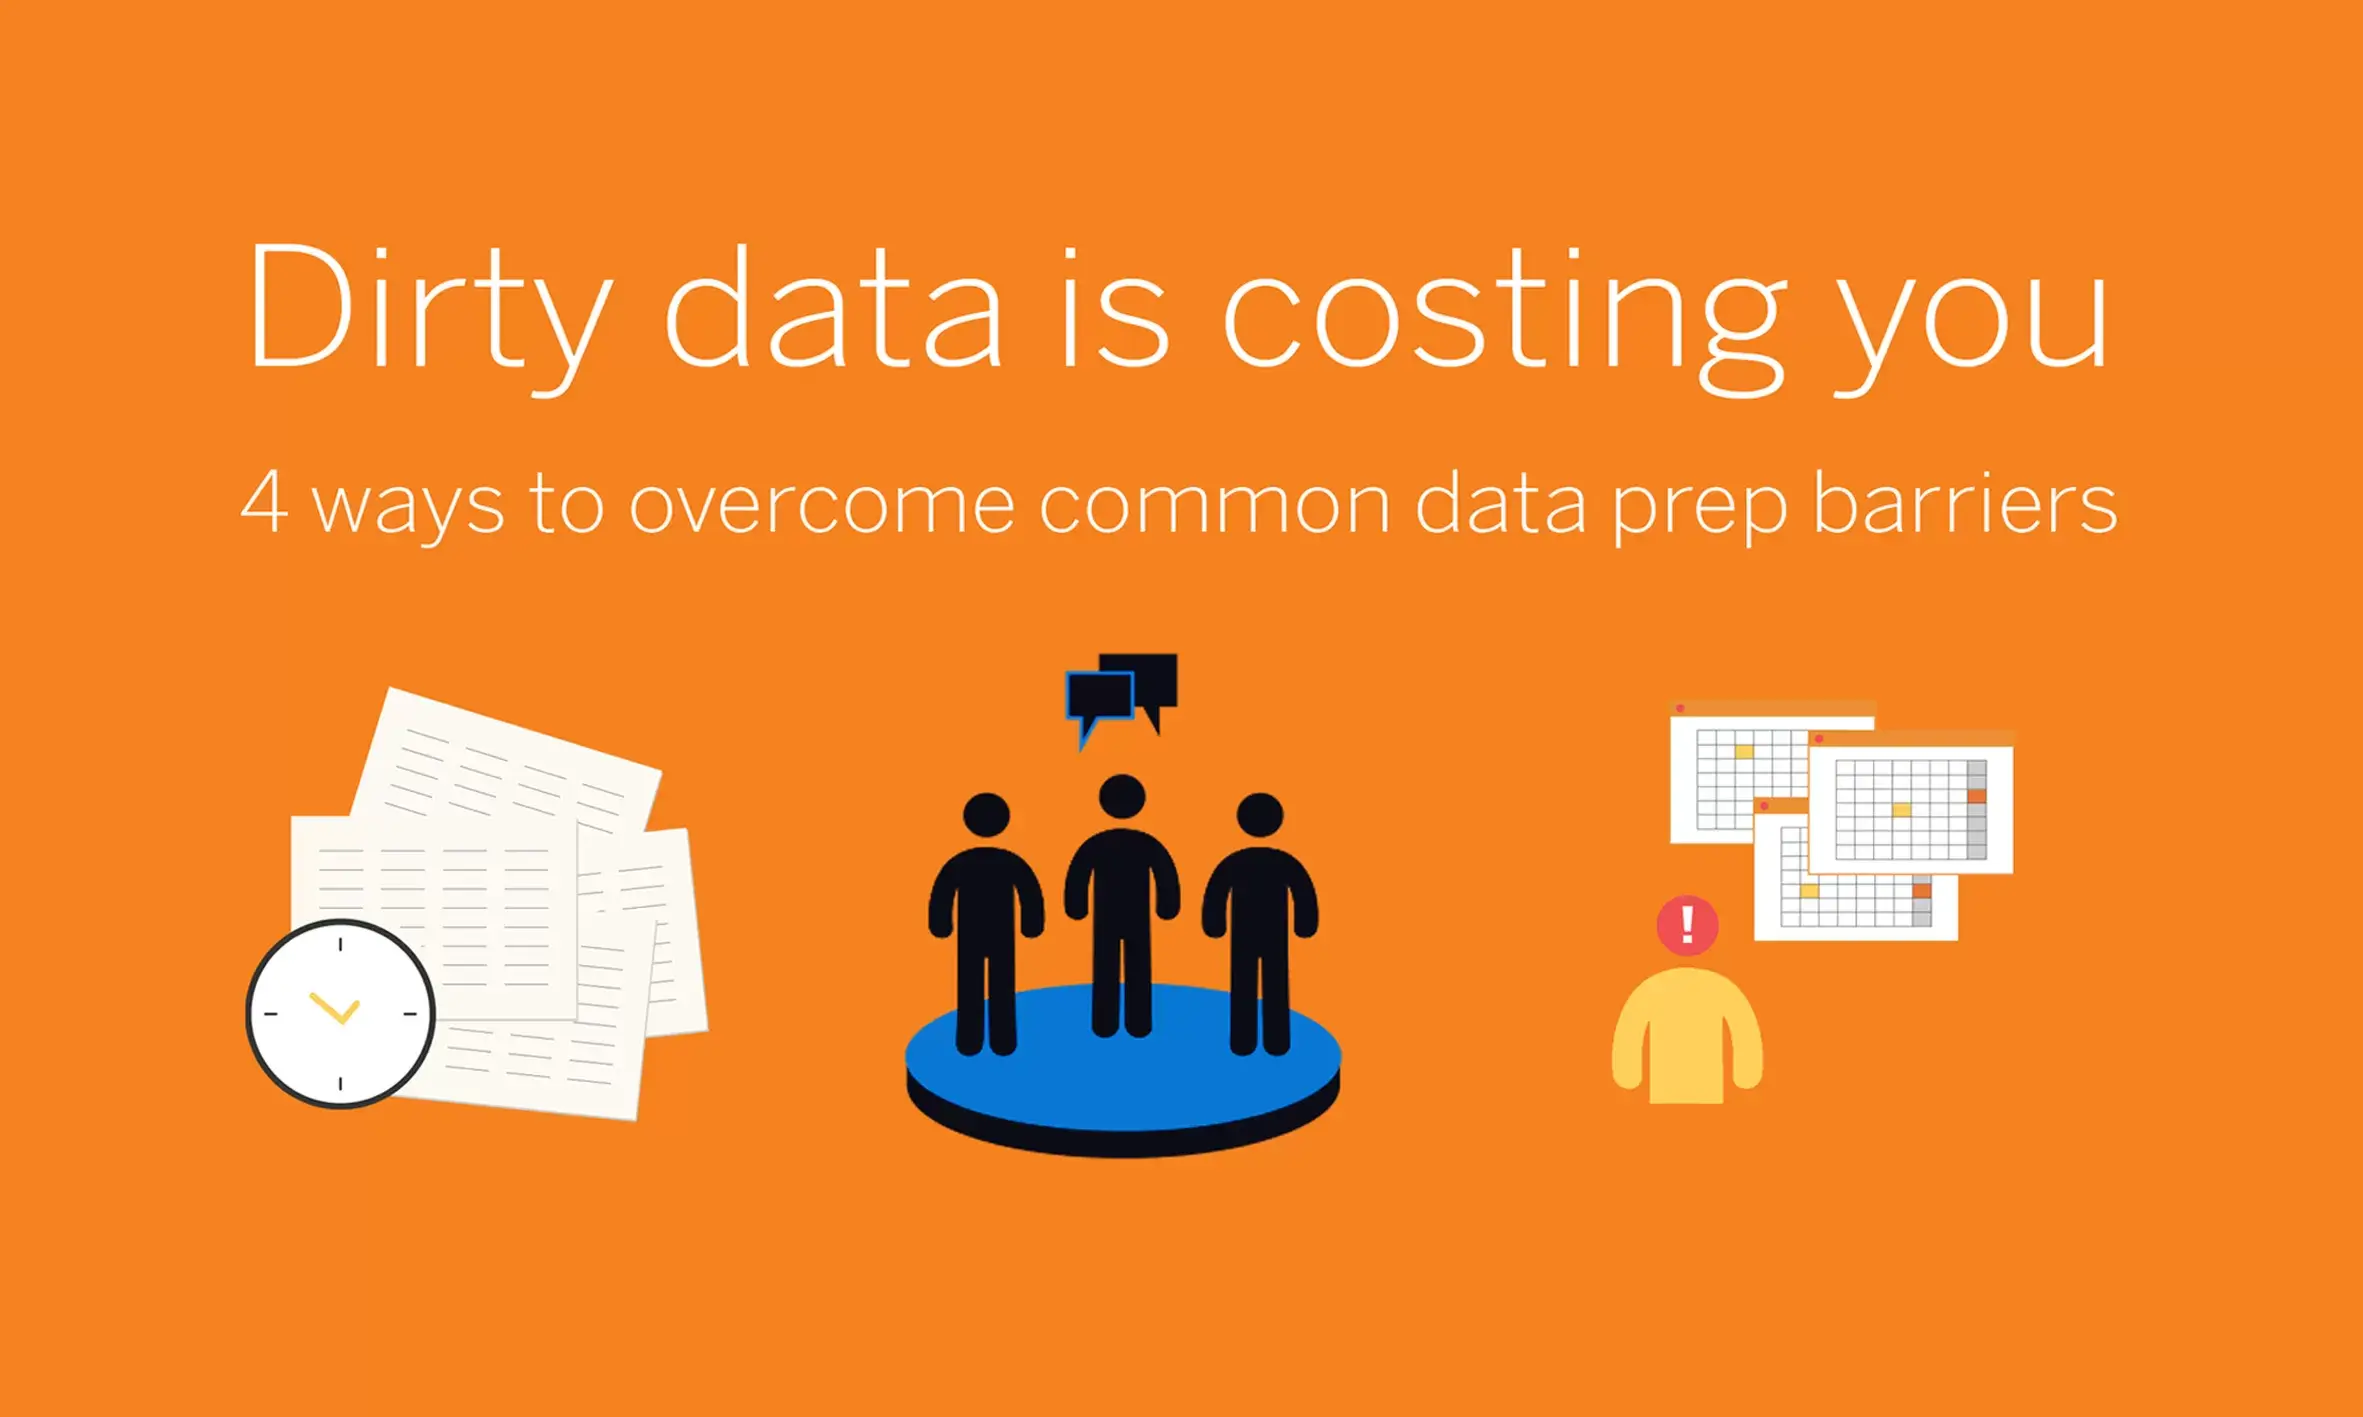 Dirty data is costing you: How to solve common data preparation issues